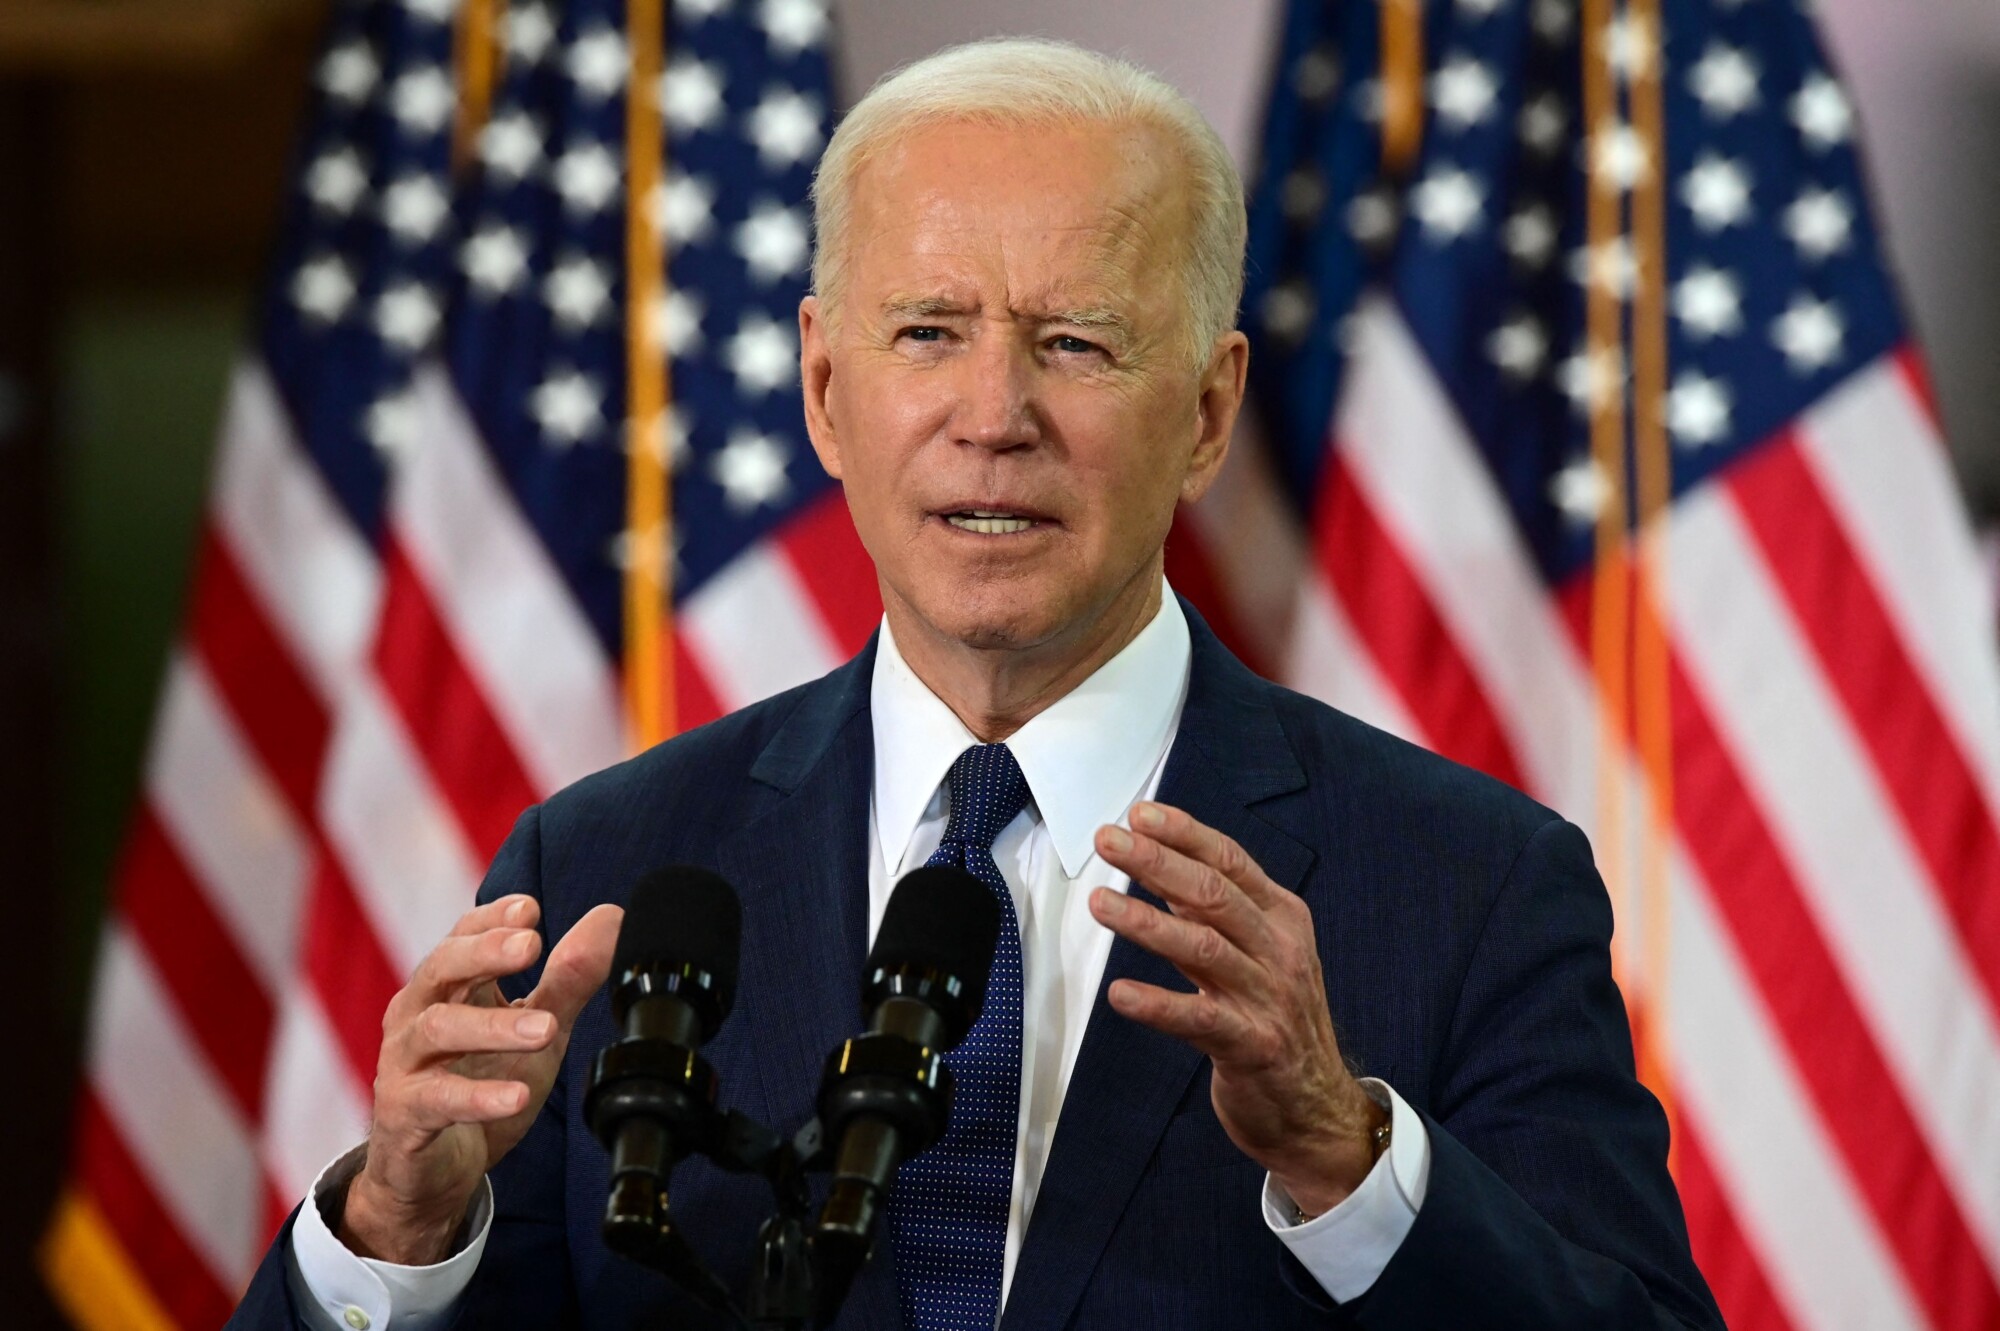 Biden Outlines $2 Trillion Infrastructure Bill That Includes Corporate Tax Hikes